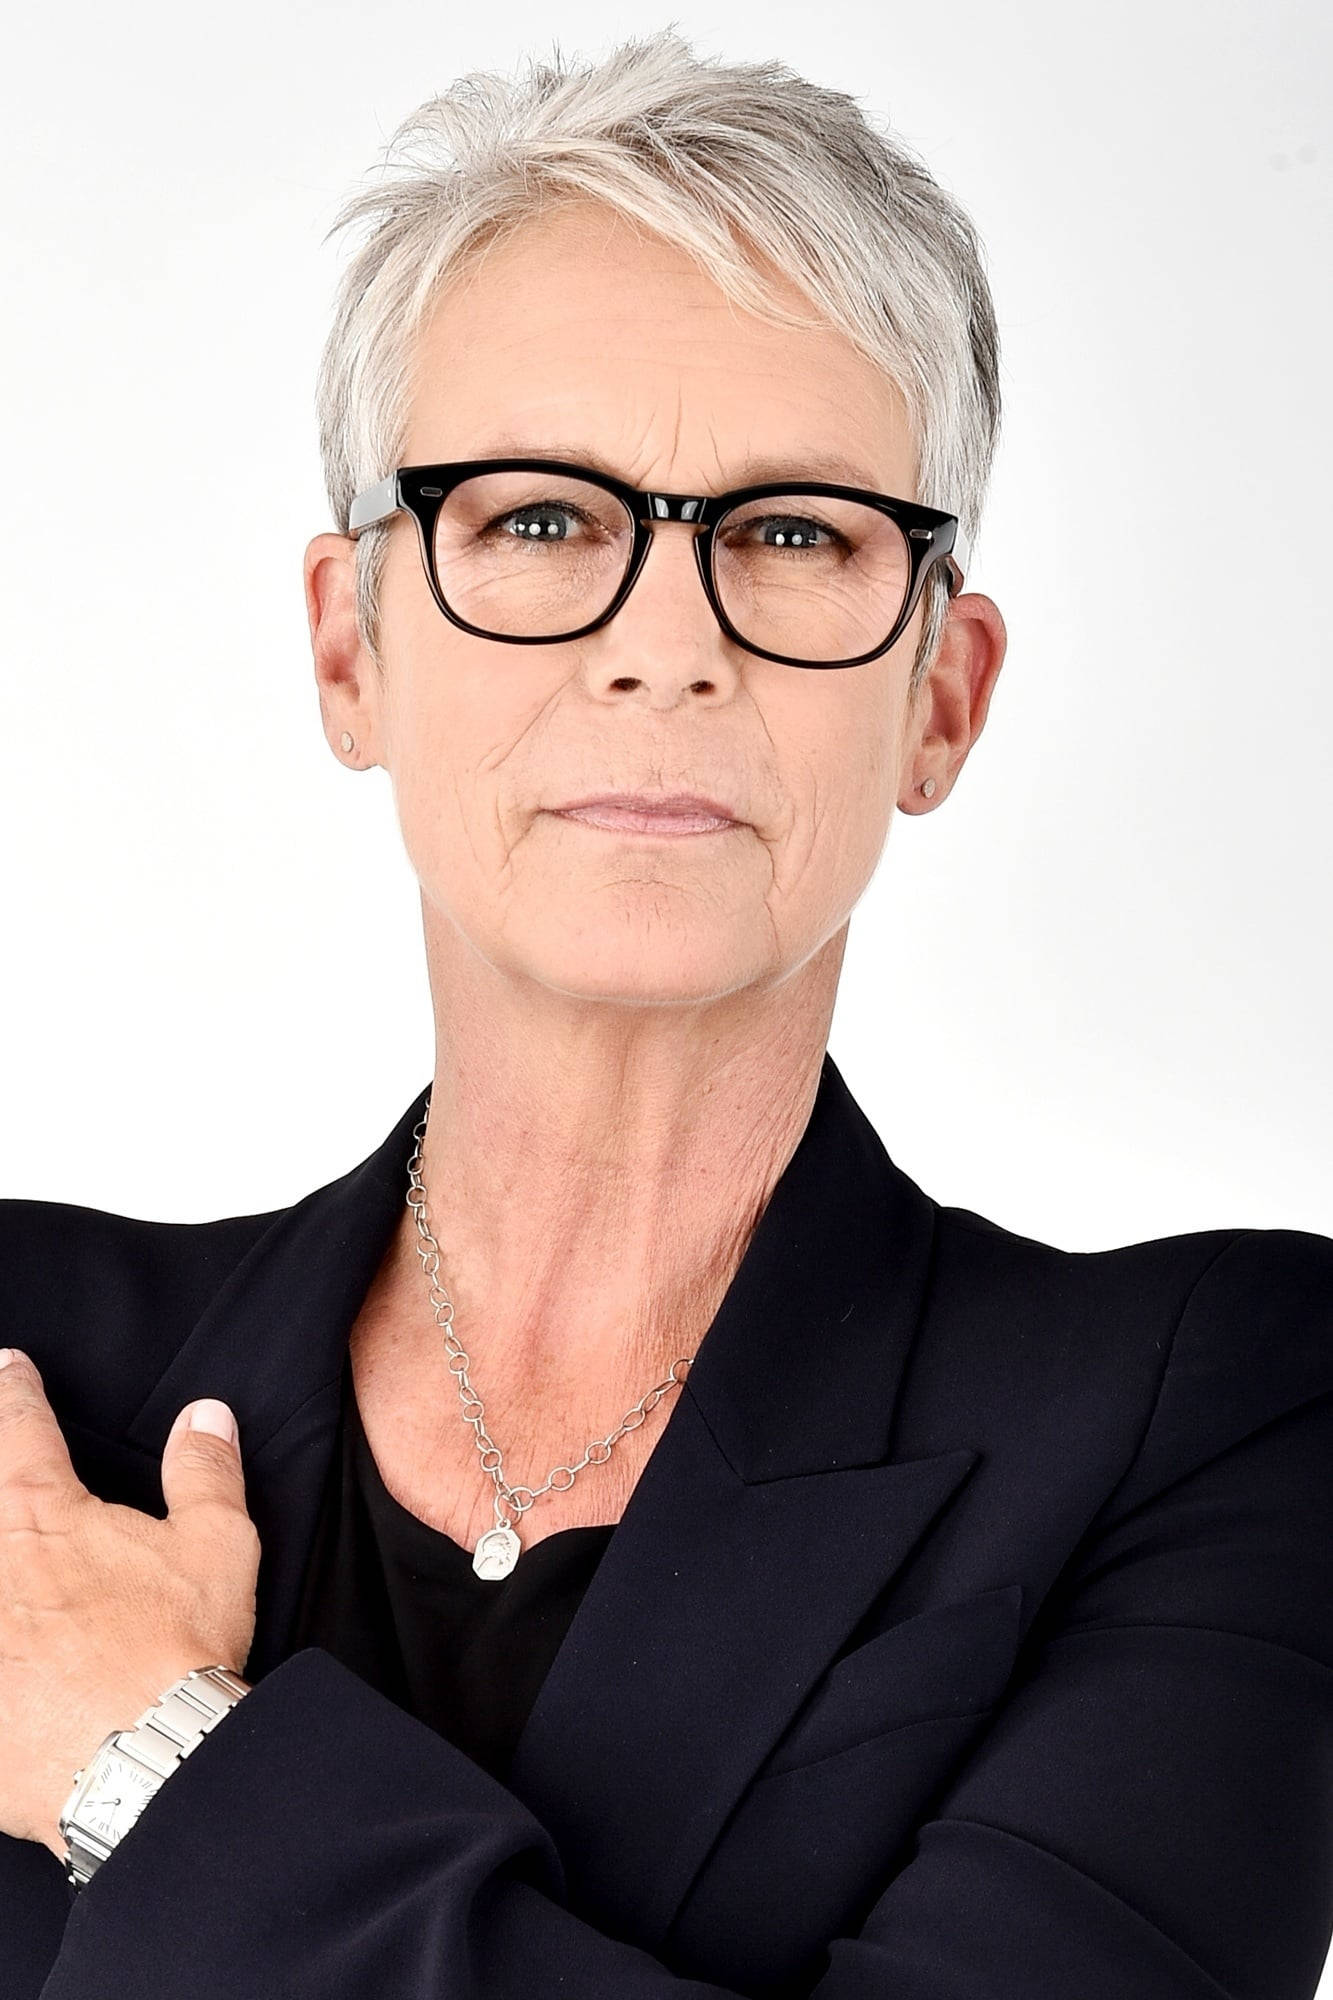 Details more than 77 wallpaper jamie lee curtis - in.cdgdbentre